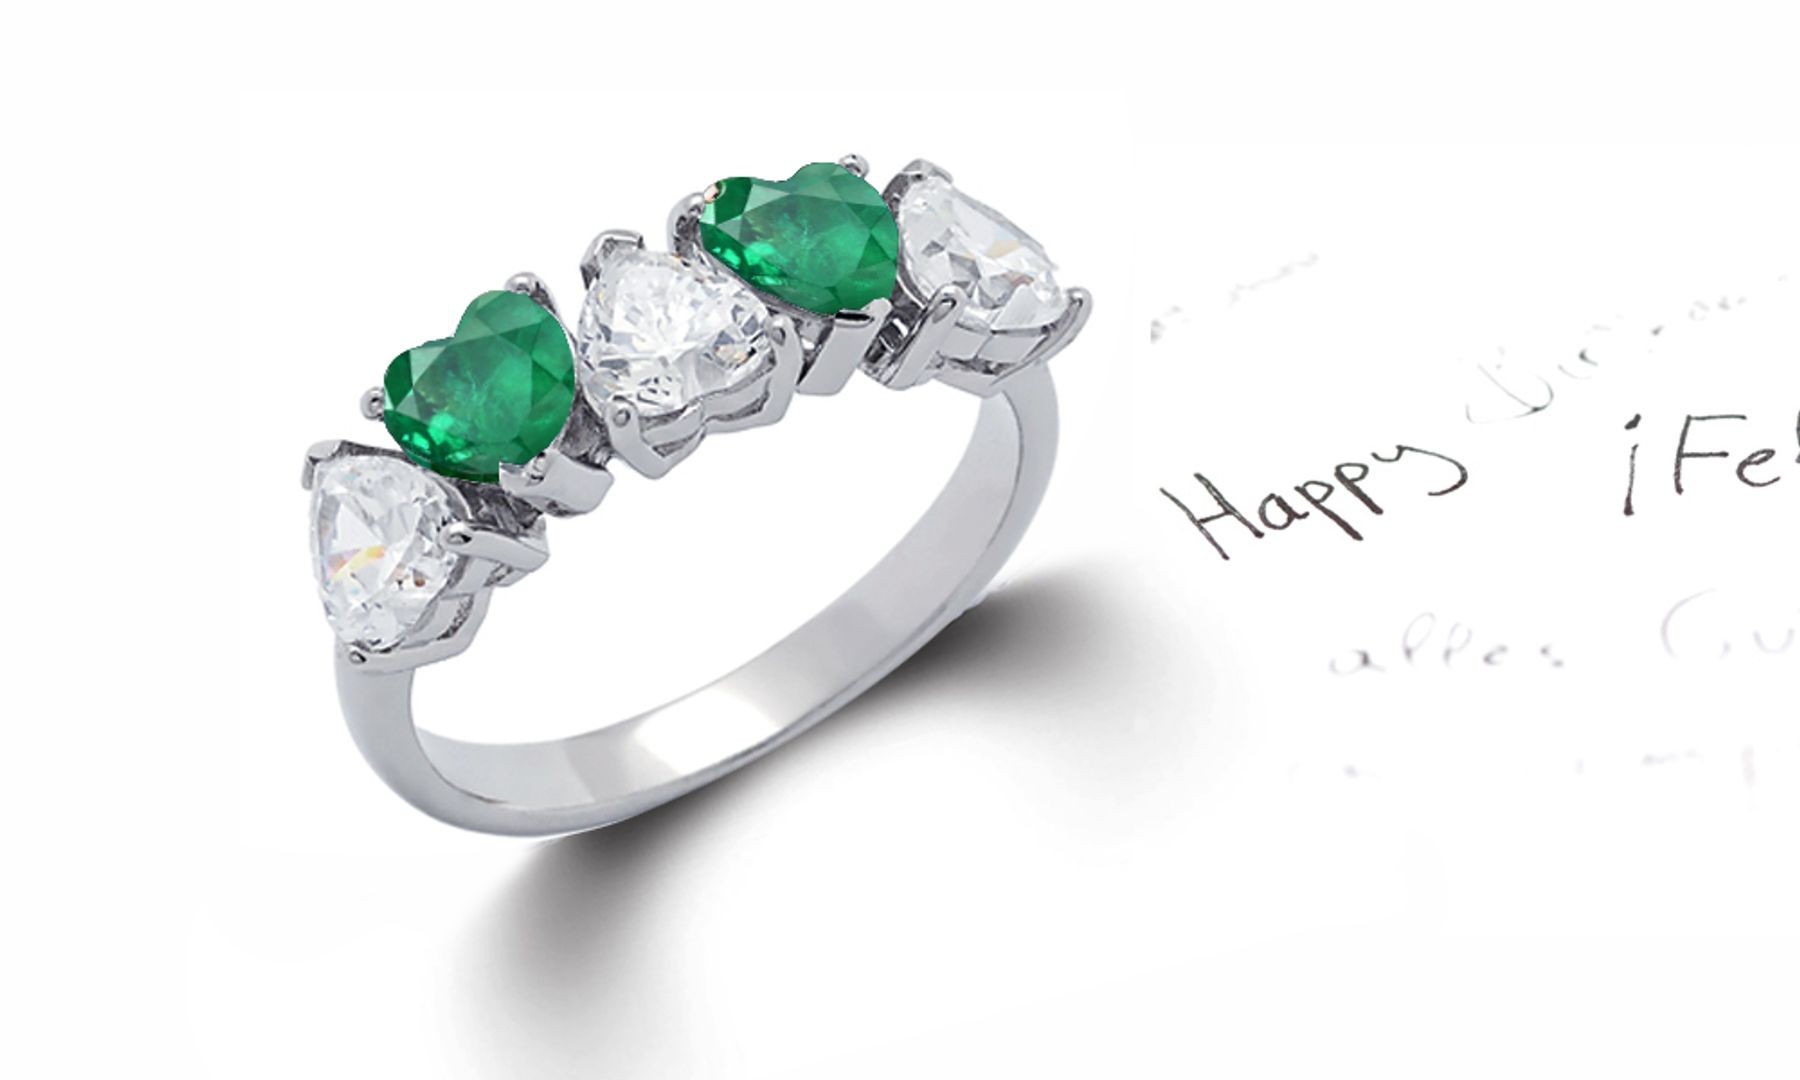 Made to Order 5 Stone Rings Heart Shaped Diamond & Emerald Rings